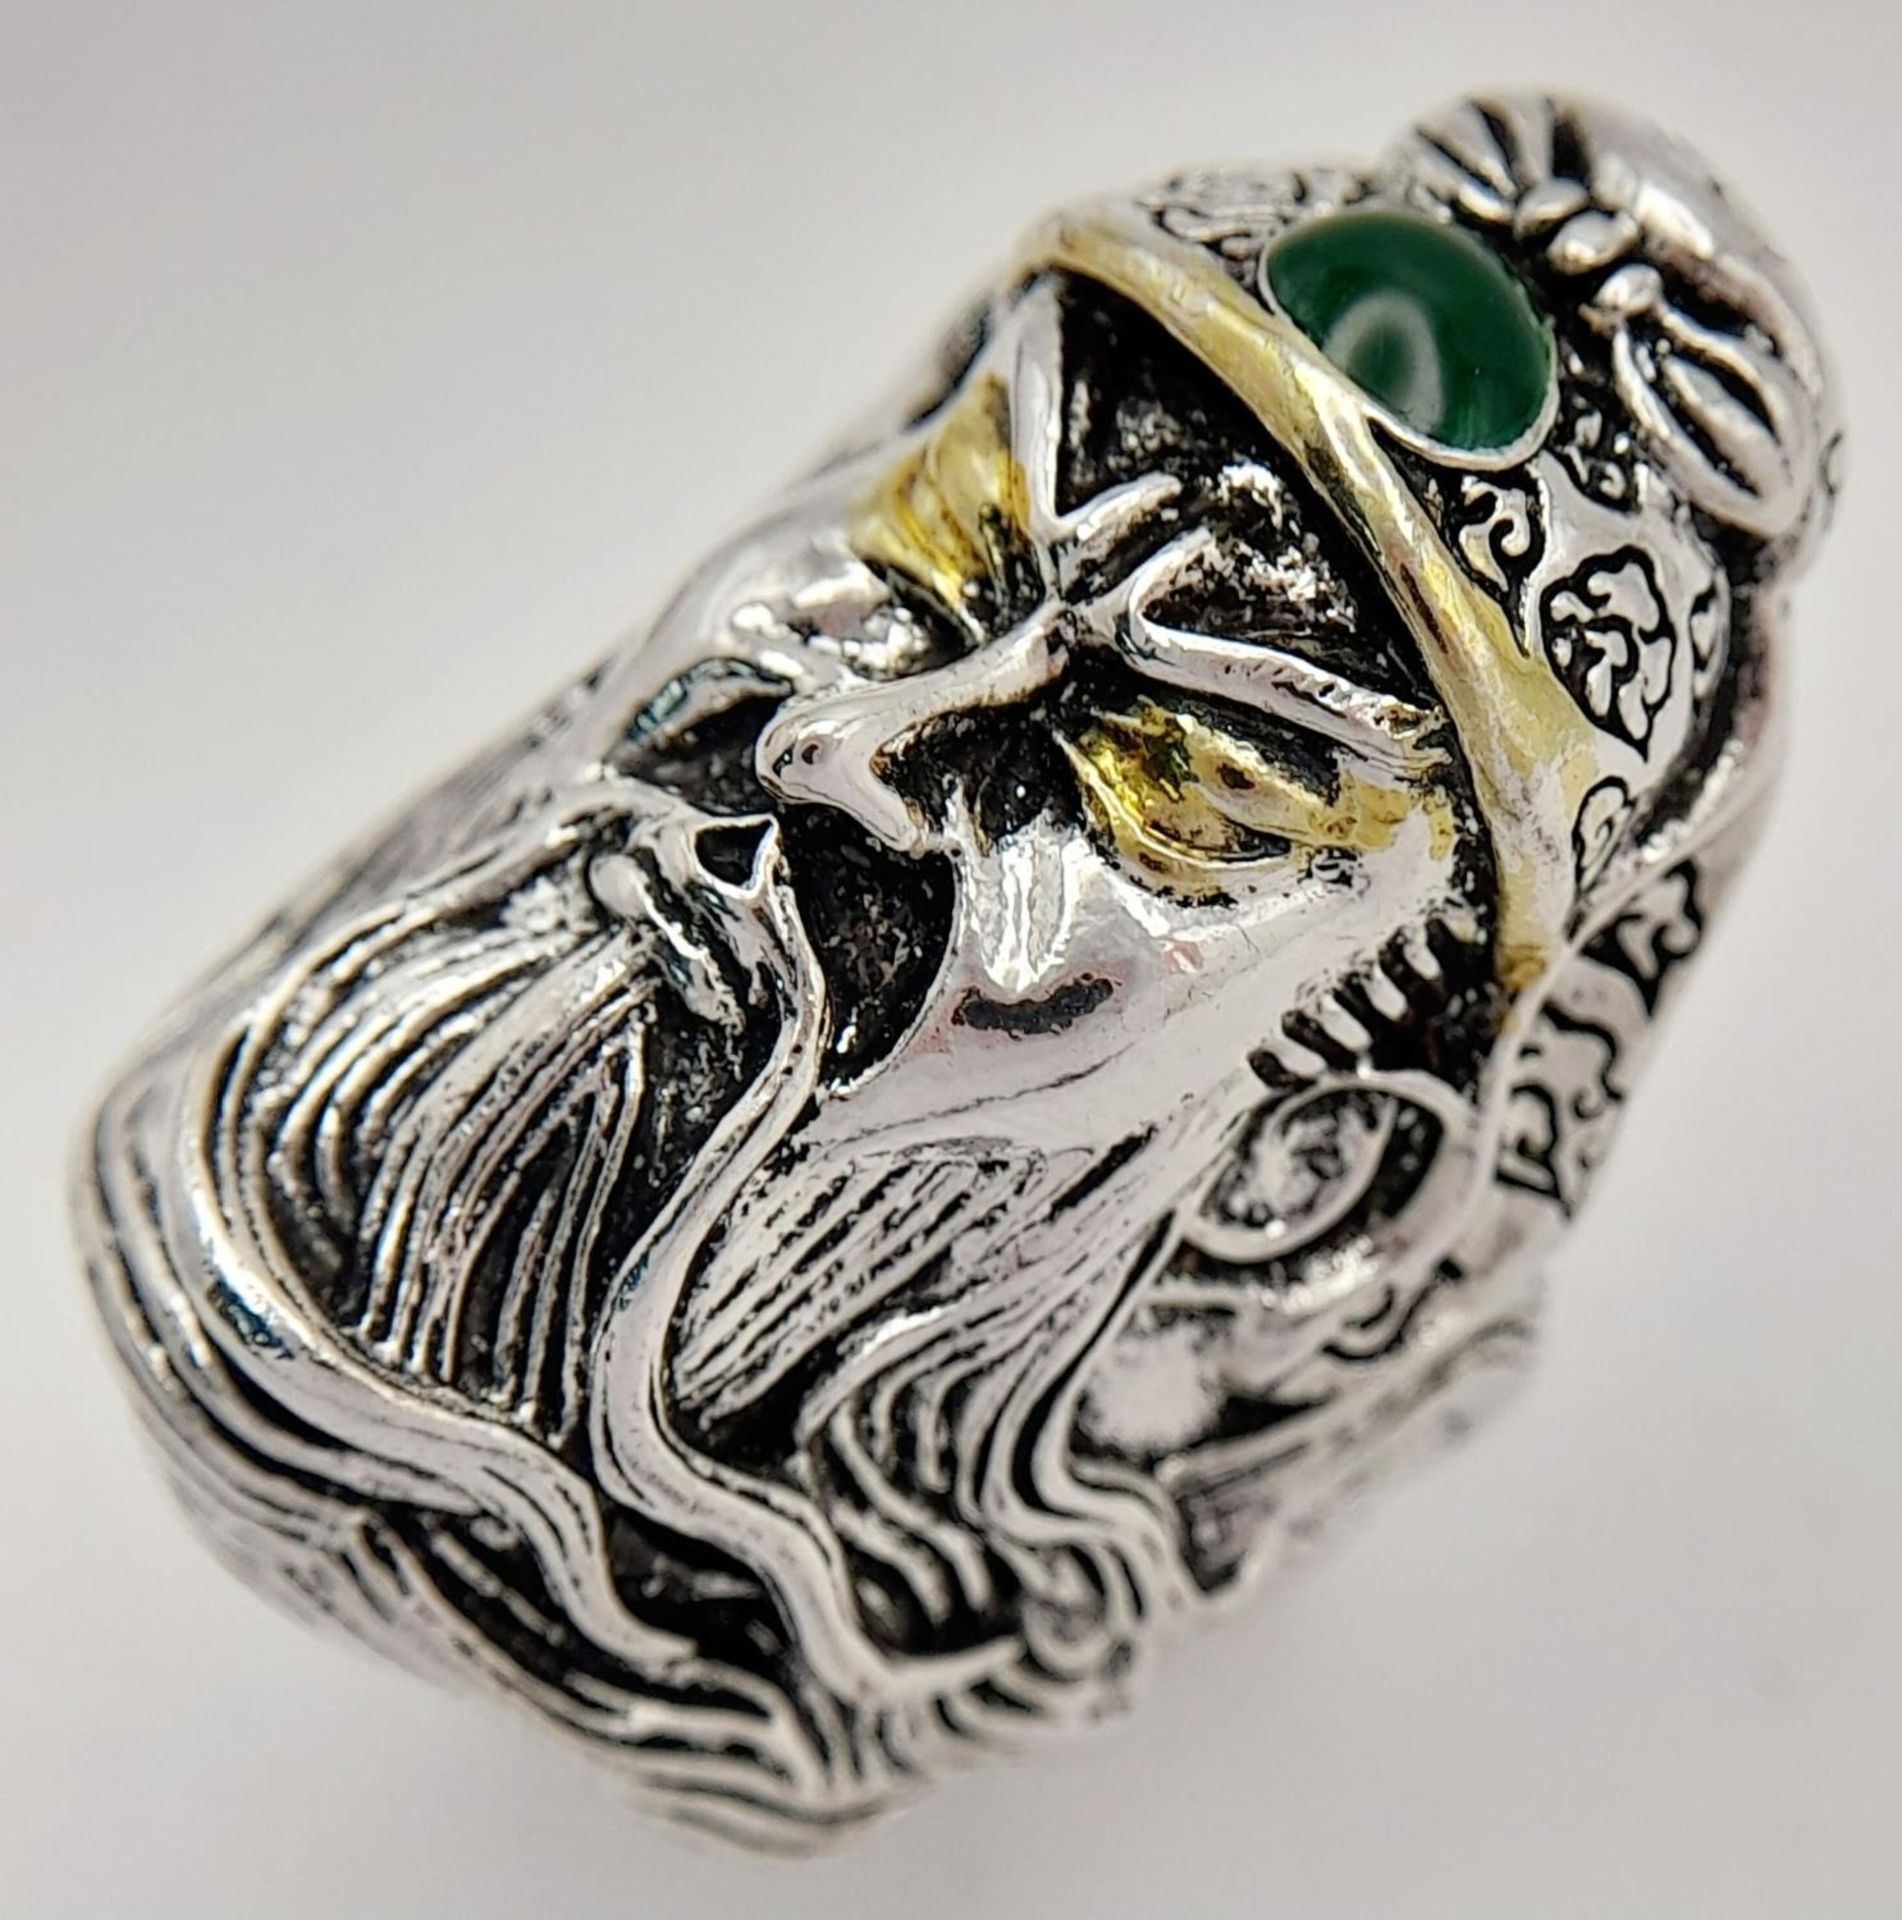 white metal (untested) Chinese Guan Yu ring with a green jade cabochon. Size: adjustable, weight: